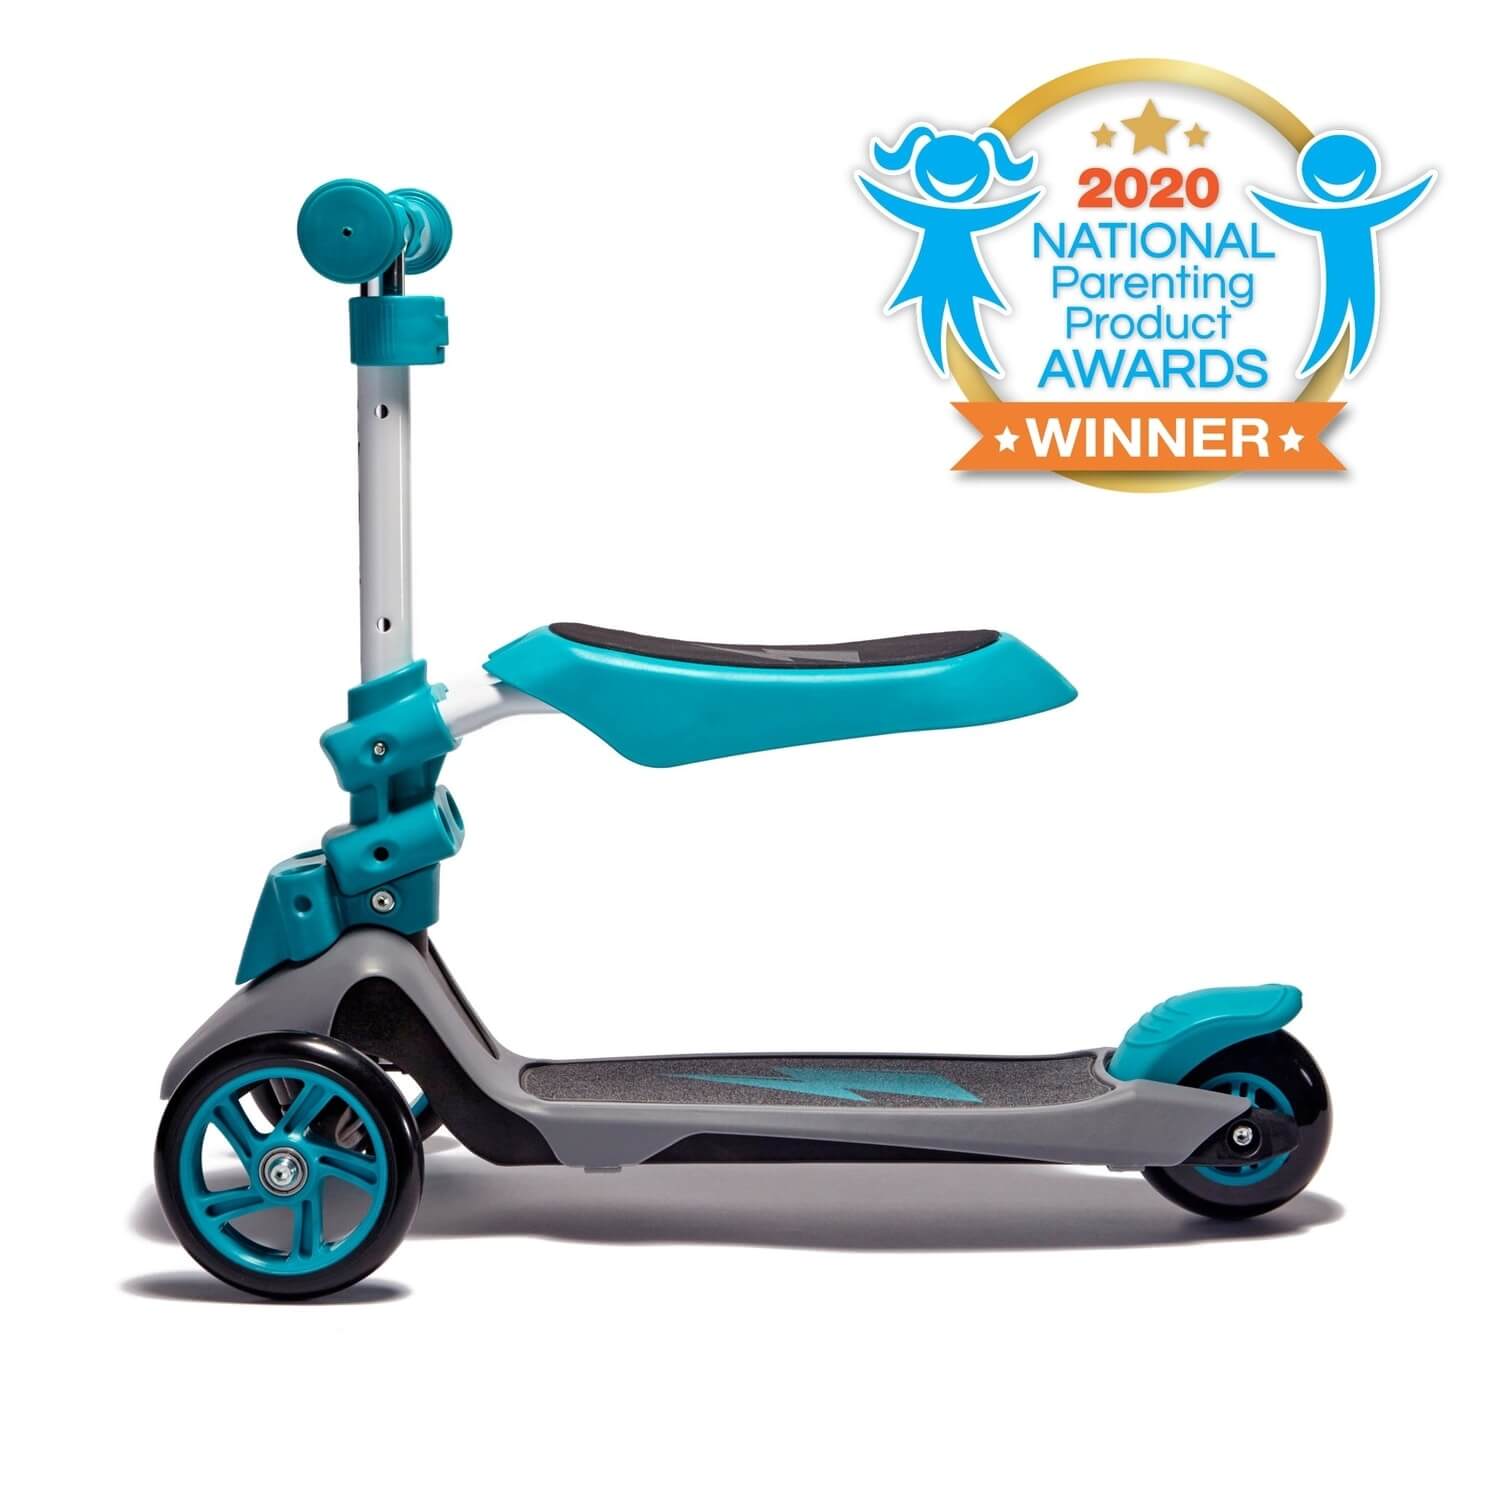 Award winning Svolta Ace 2-in-1 toddler and little kids scooter ride on in Teal Grey Gray, Sit and Stand, convertible